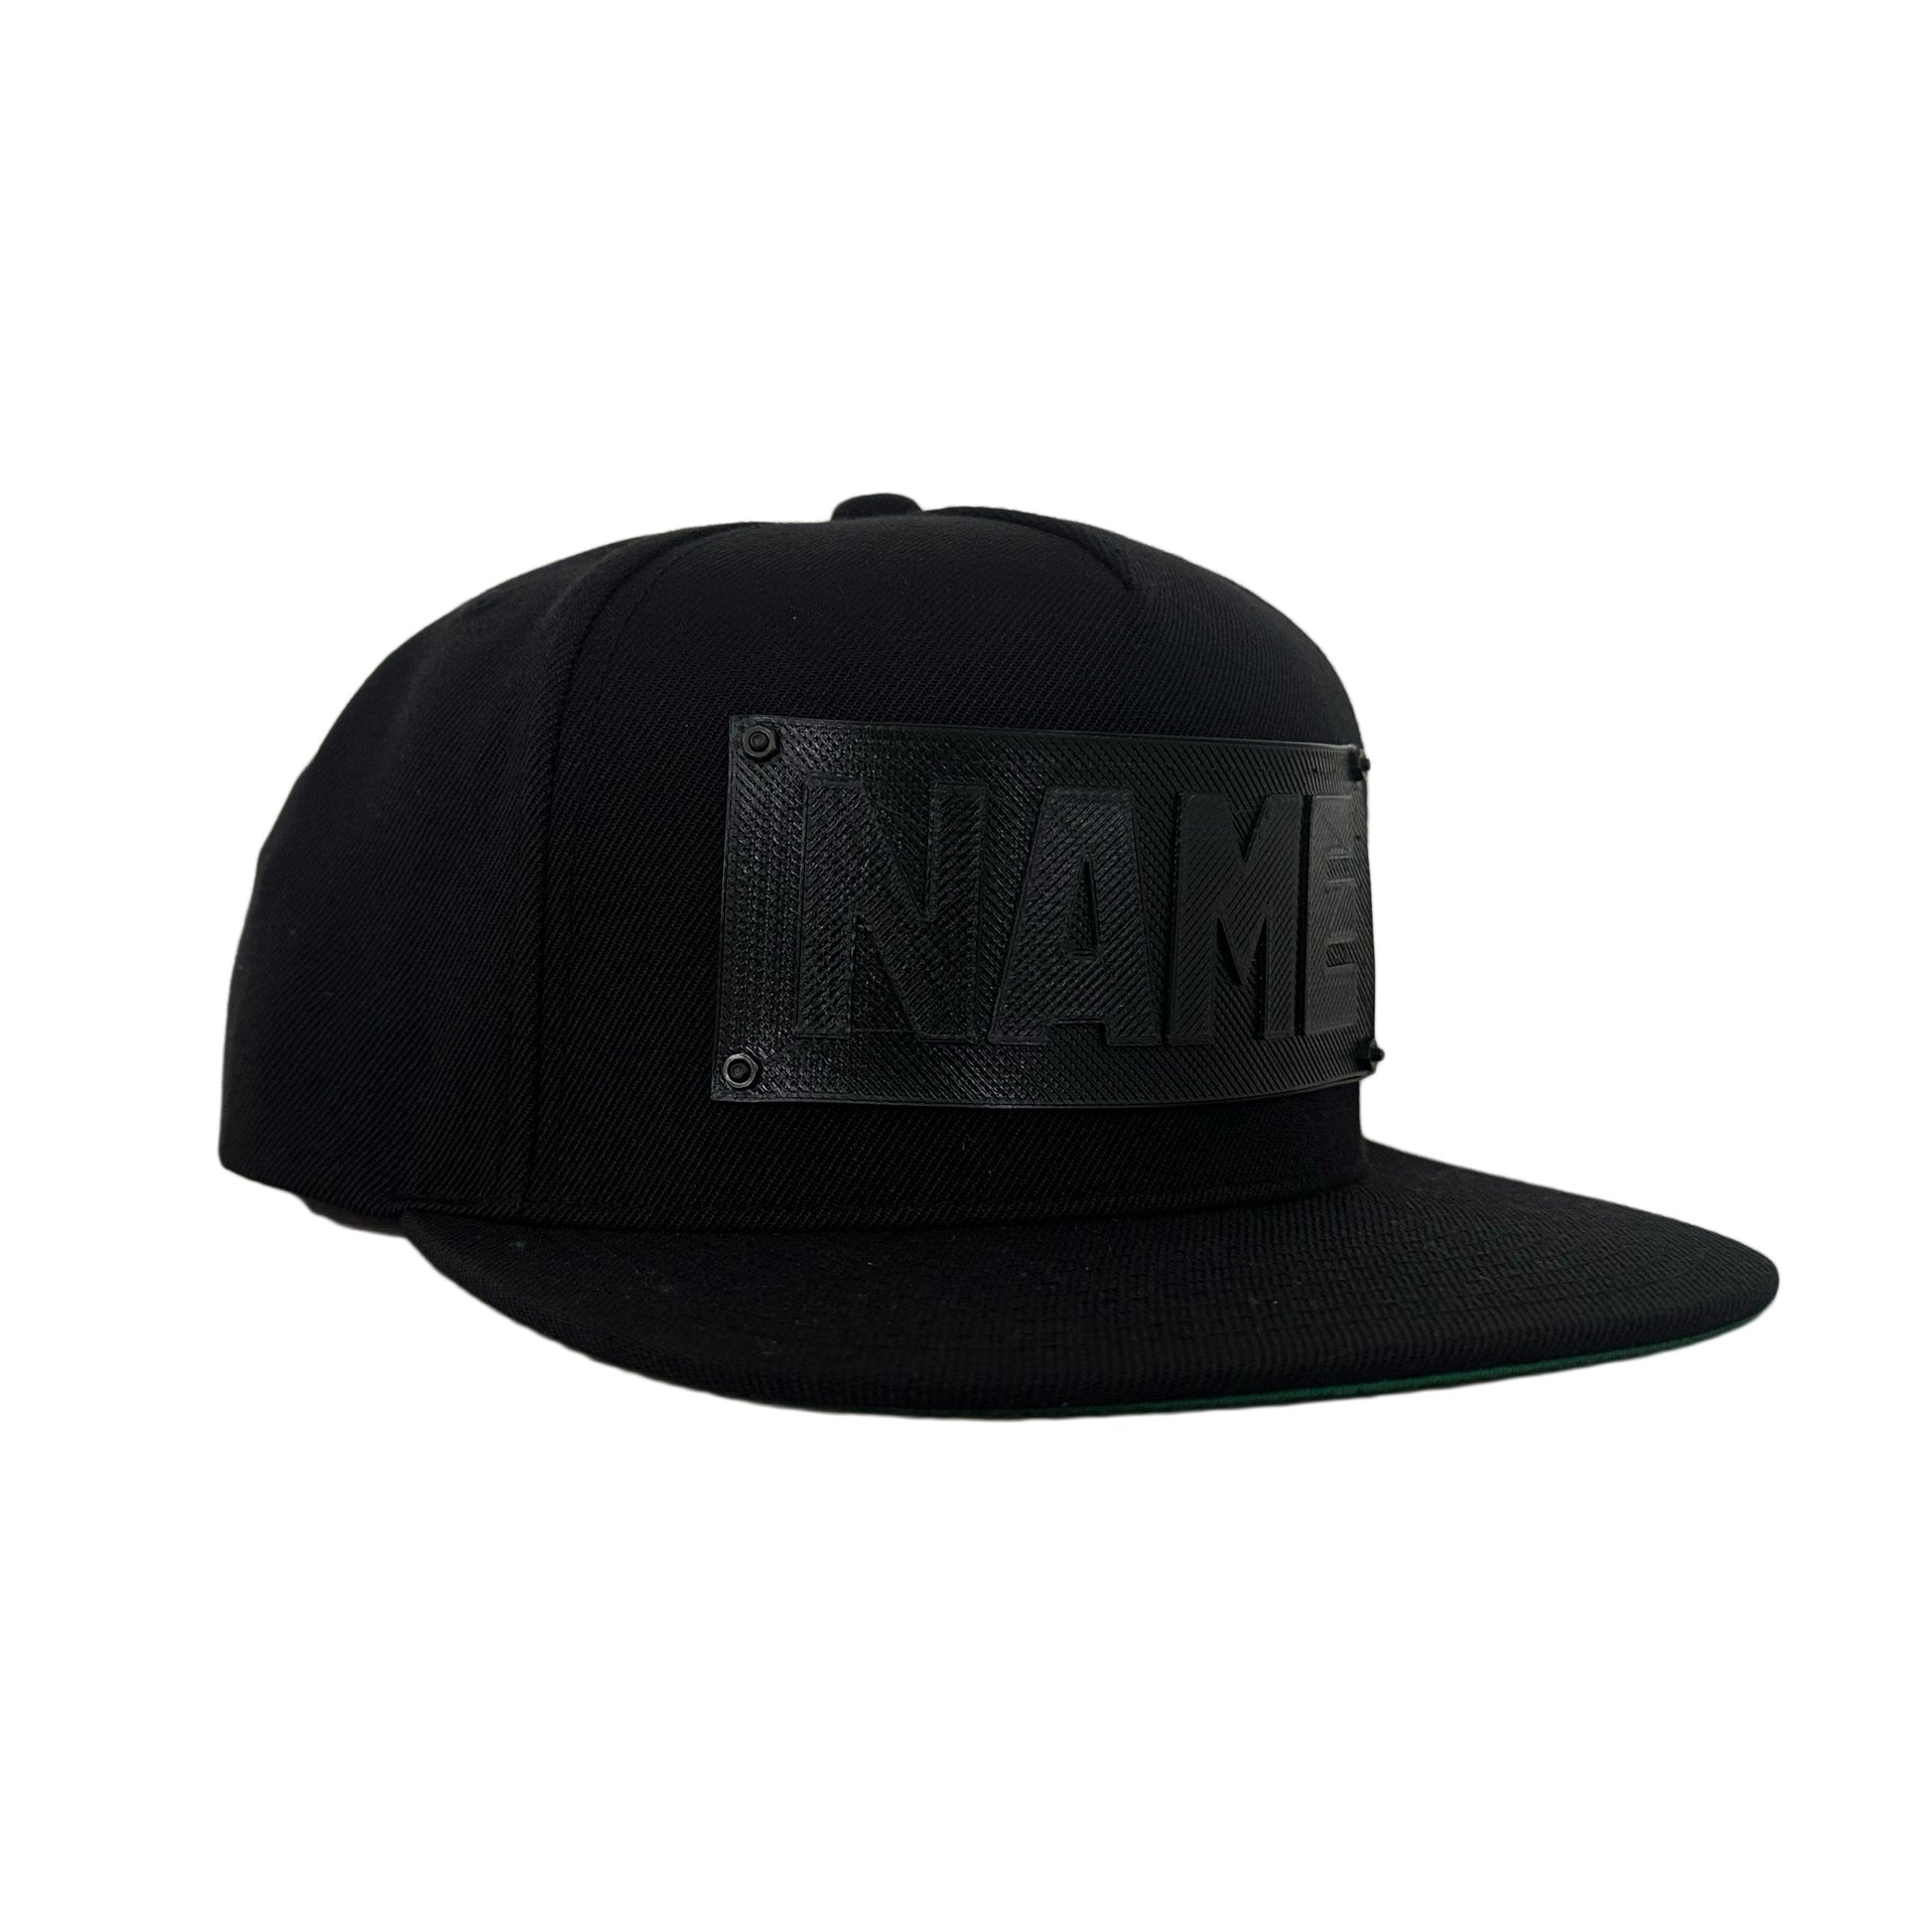 A black snapback baseball hat with a black logo panel that says"NAME".